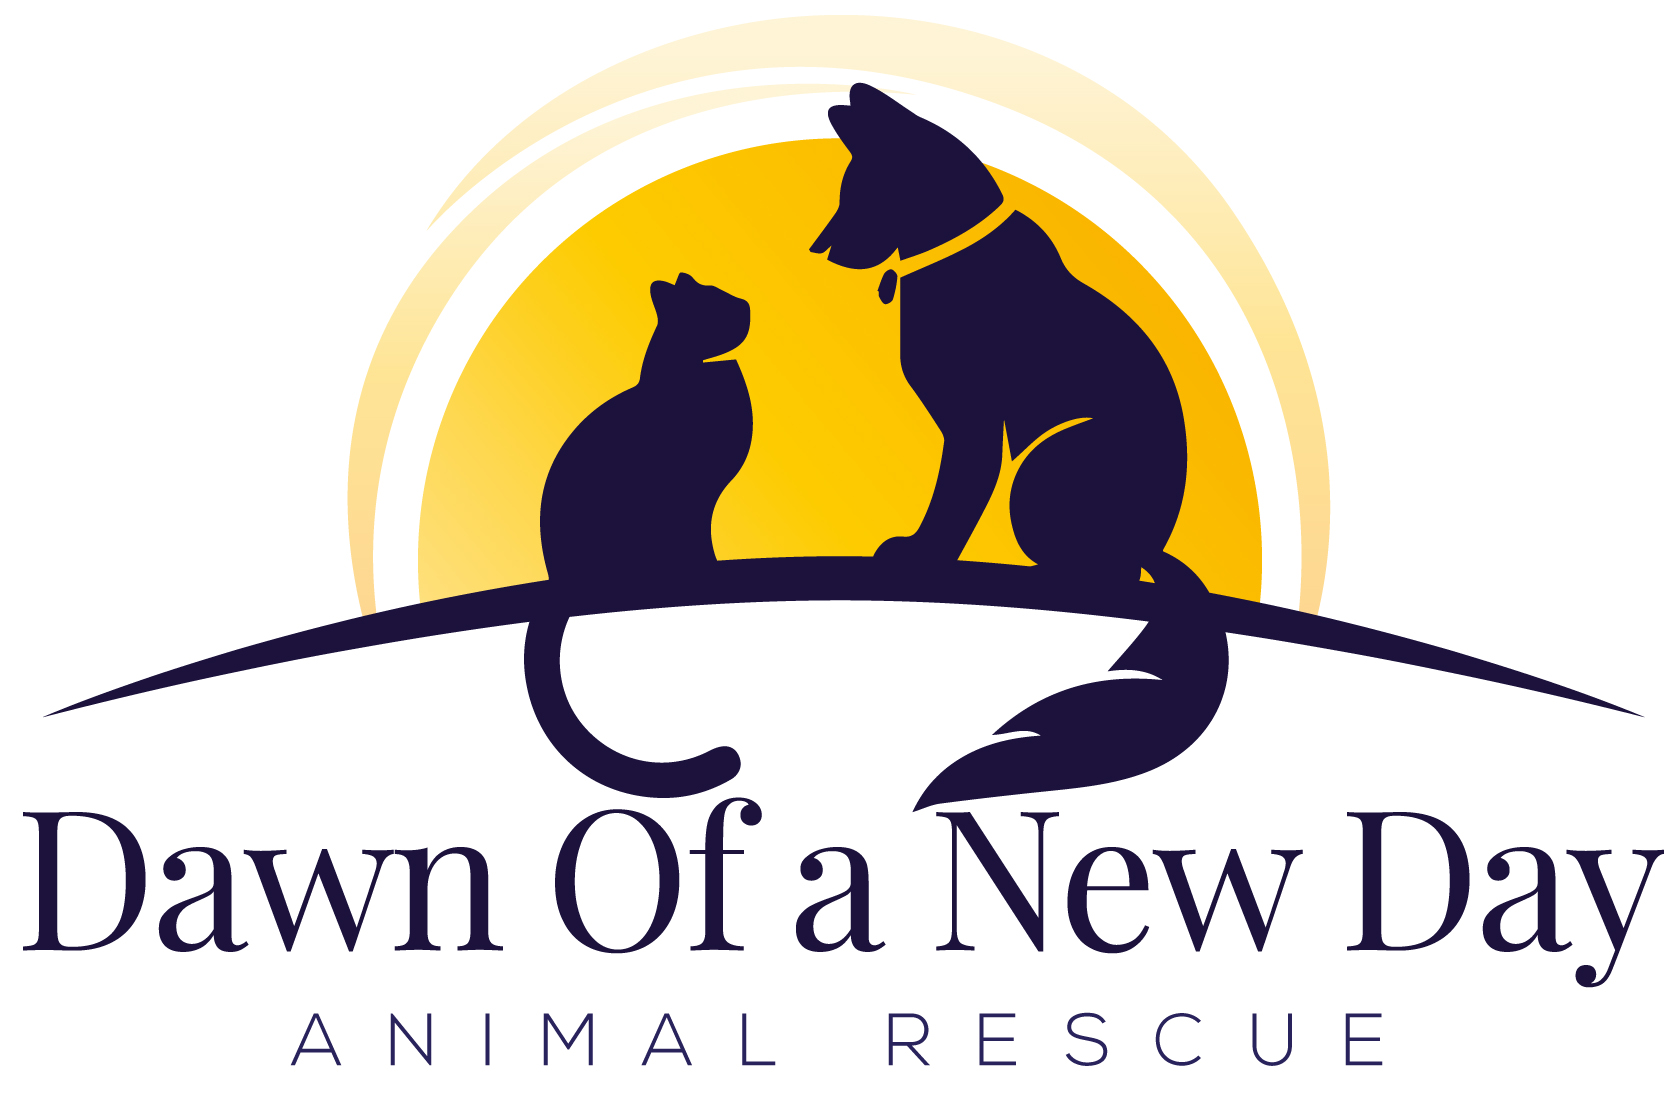 Dawn Of A New Day Animal Rescue, Inc.